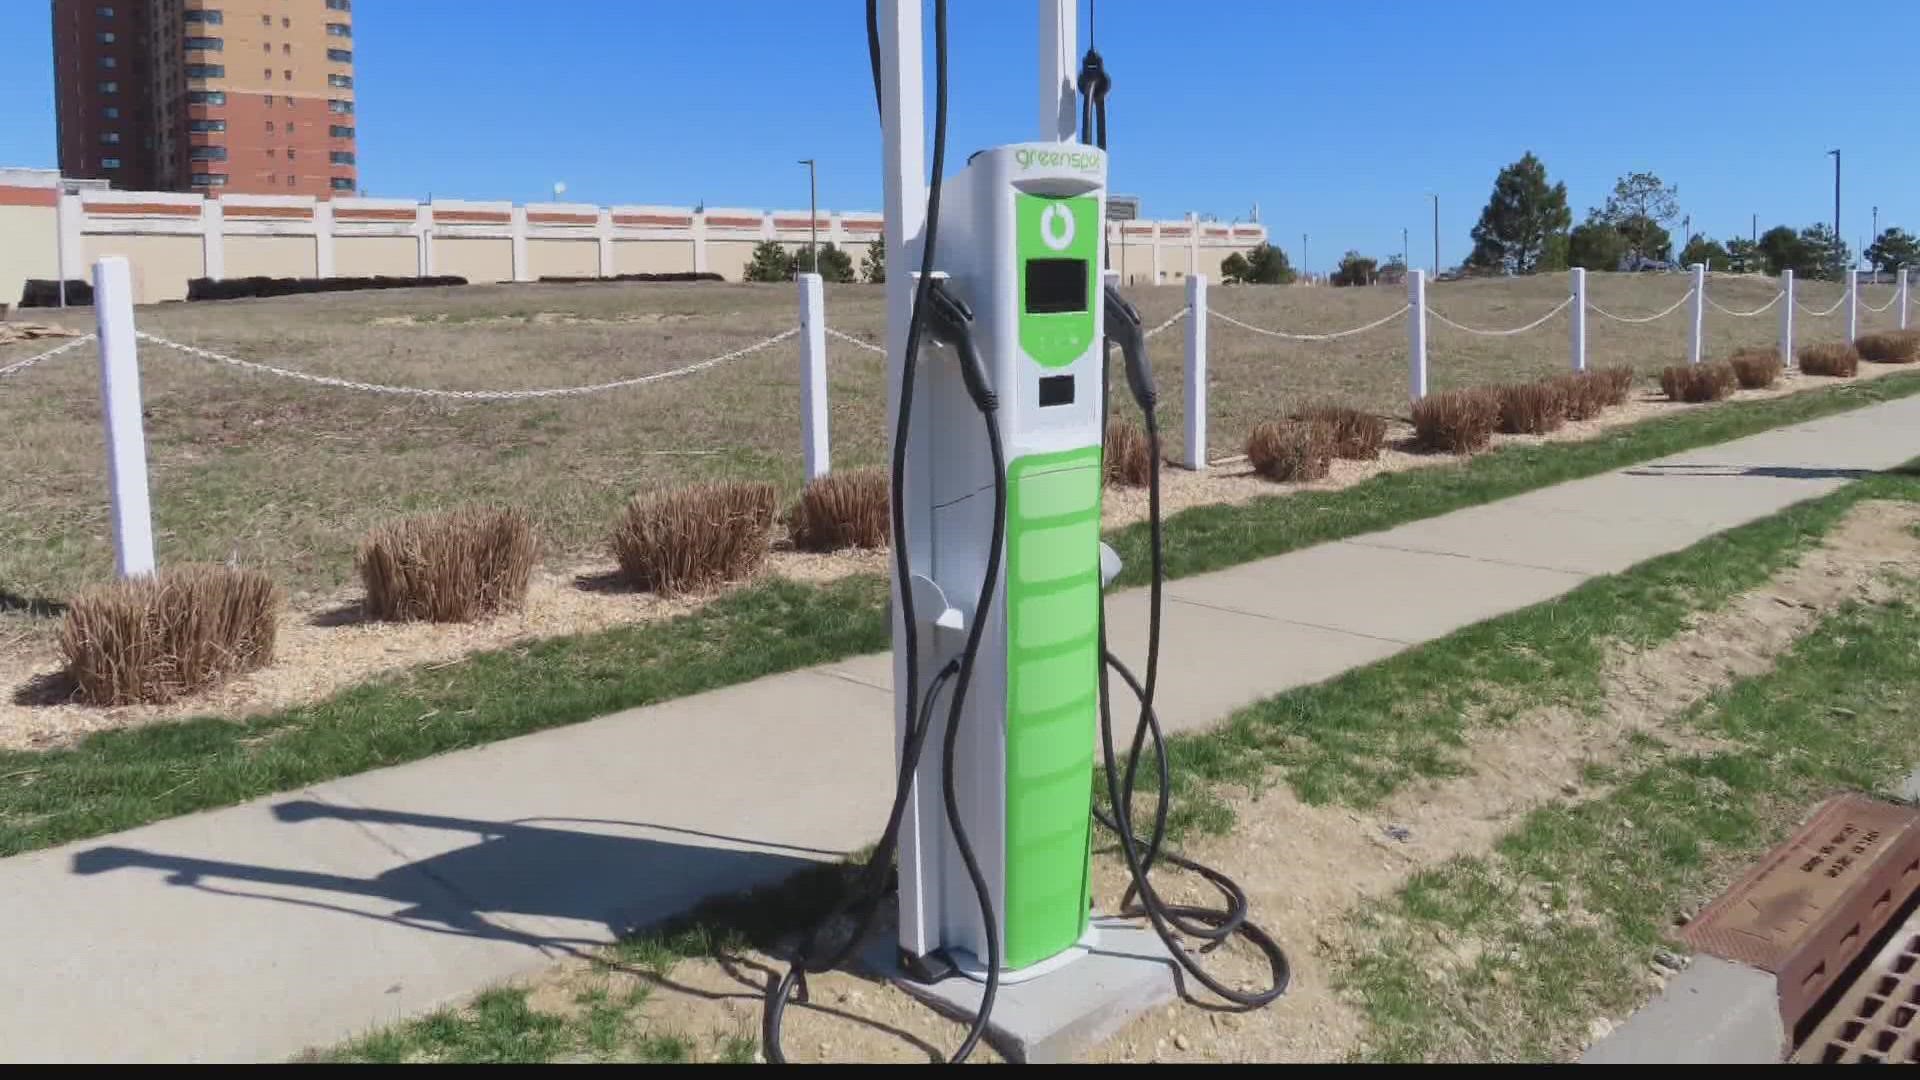 Arizona is looking to juice up dozens of new electric charging stations on major interstates across the state.